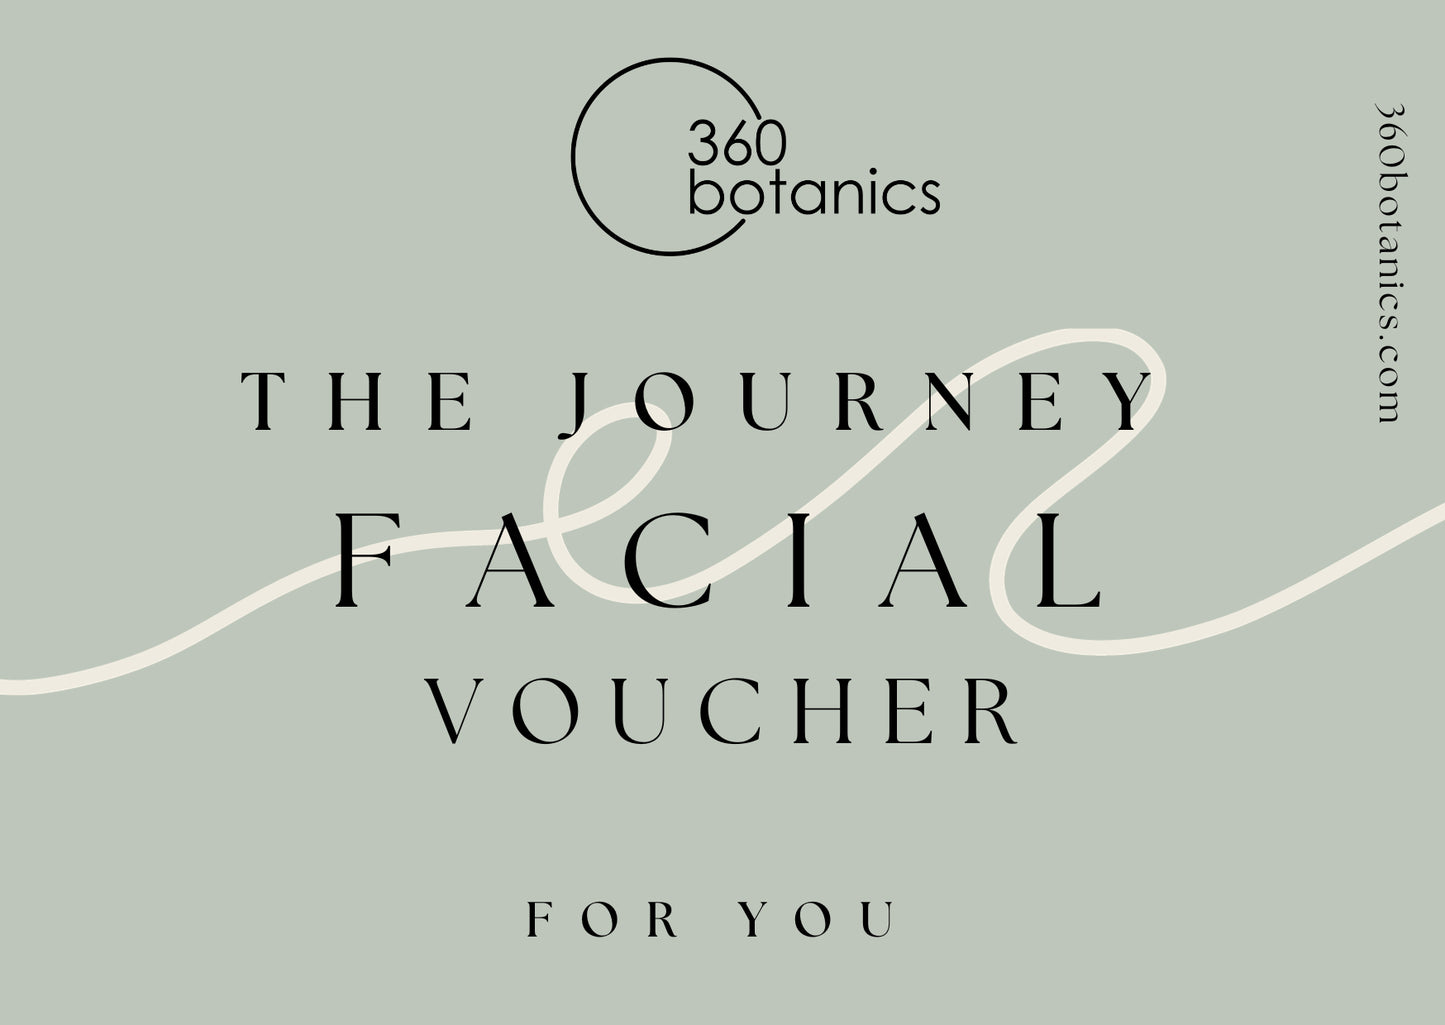 Elegant gift voucher for 'The Journey Facial' from 360 Botanics, featuring a calming sage green background with a sophisticated design. The company's logo is displayed at the top, with the website '360botanics.com' at the top right corner. Prominent, stylish white and dark grey text spells out the offer, accentuated by a decorative white line that swirls across the image, with 'FOR YOU' at the bottom